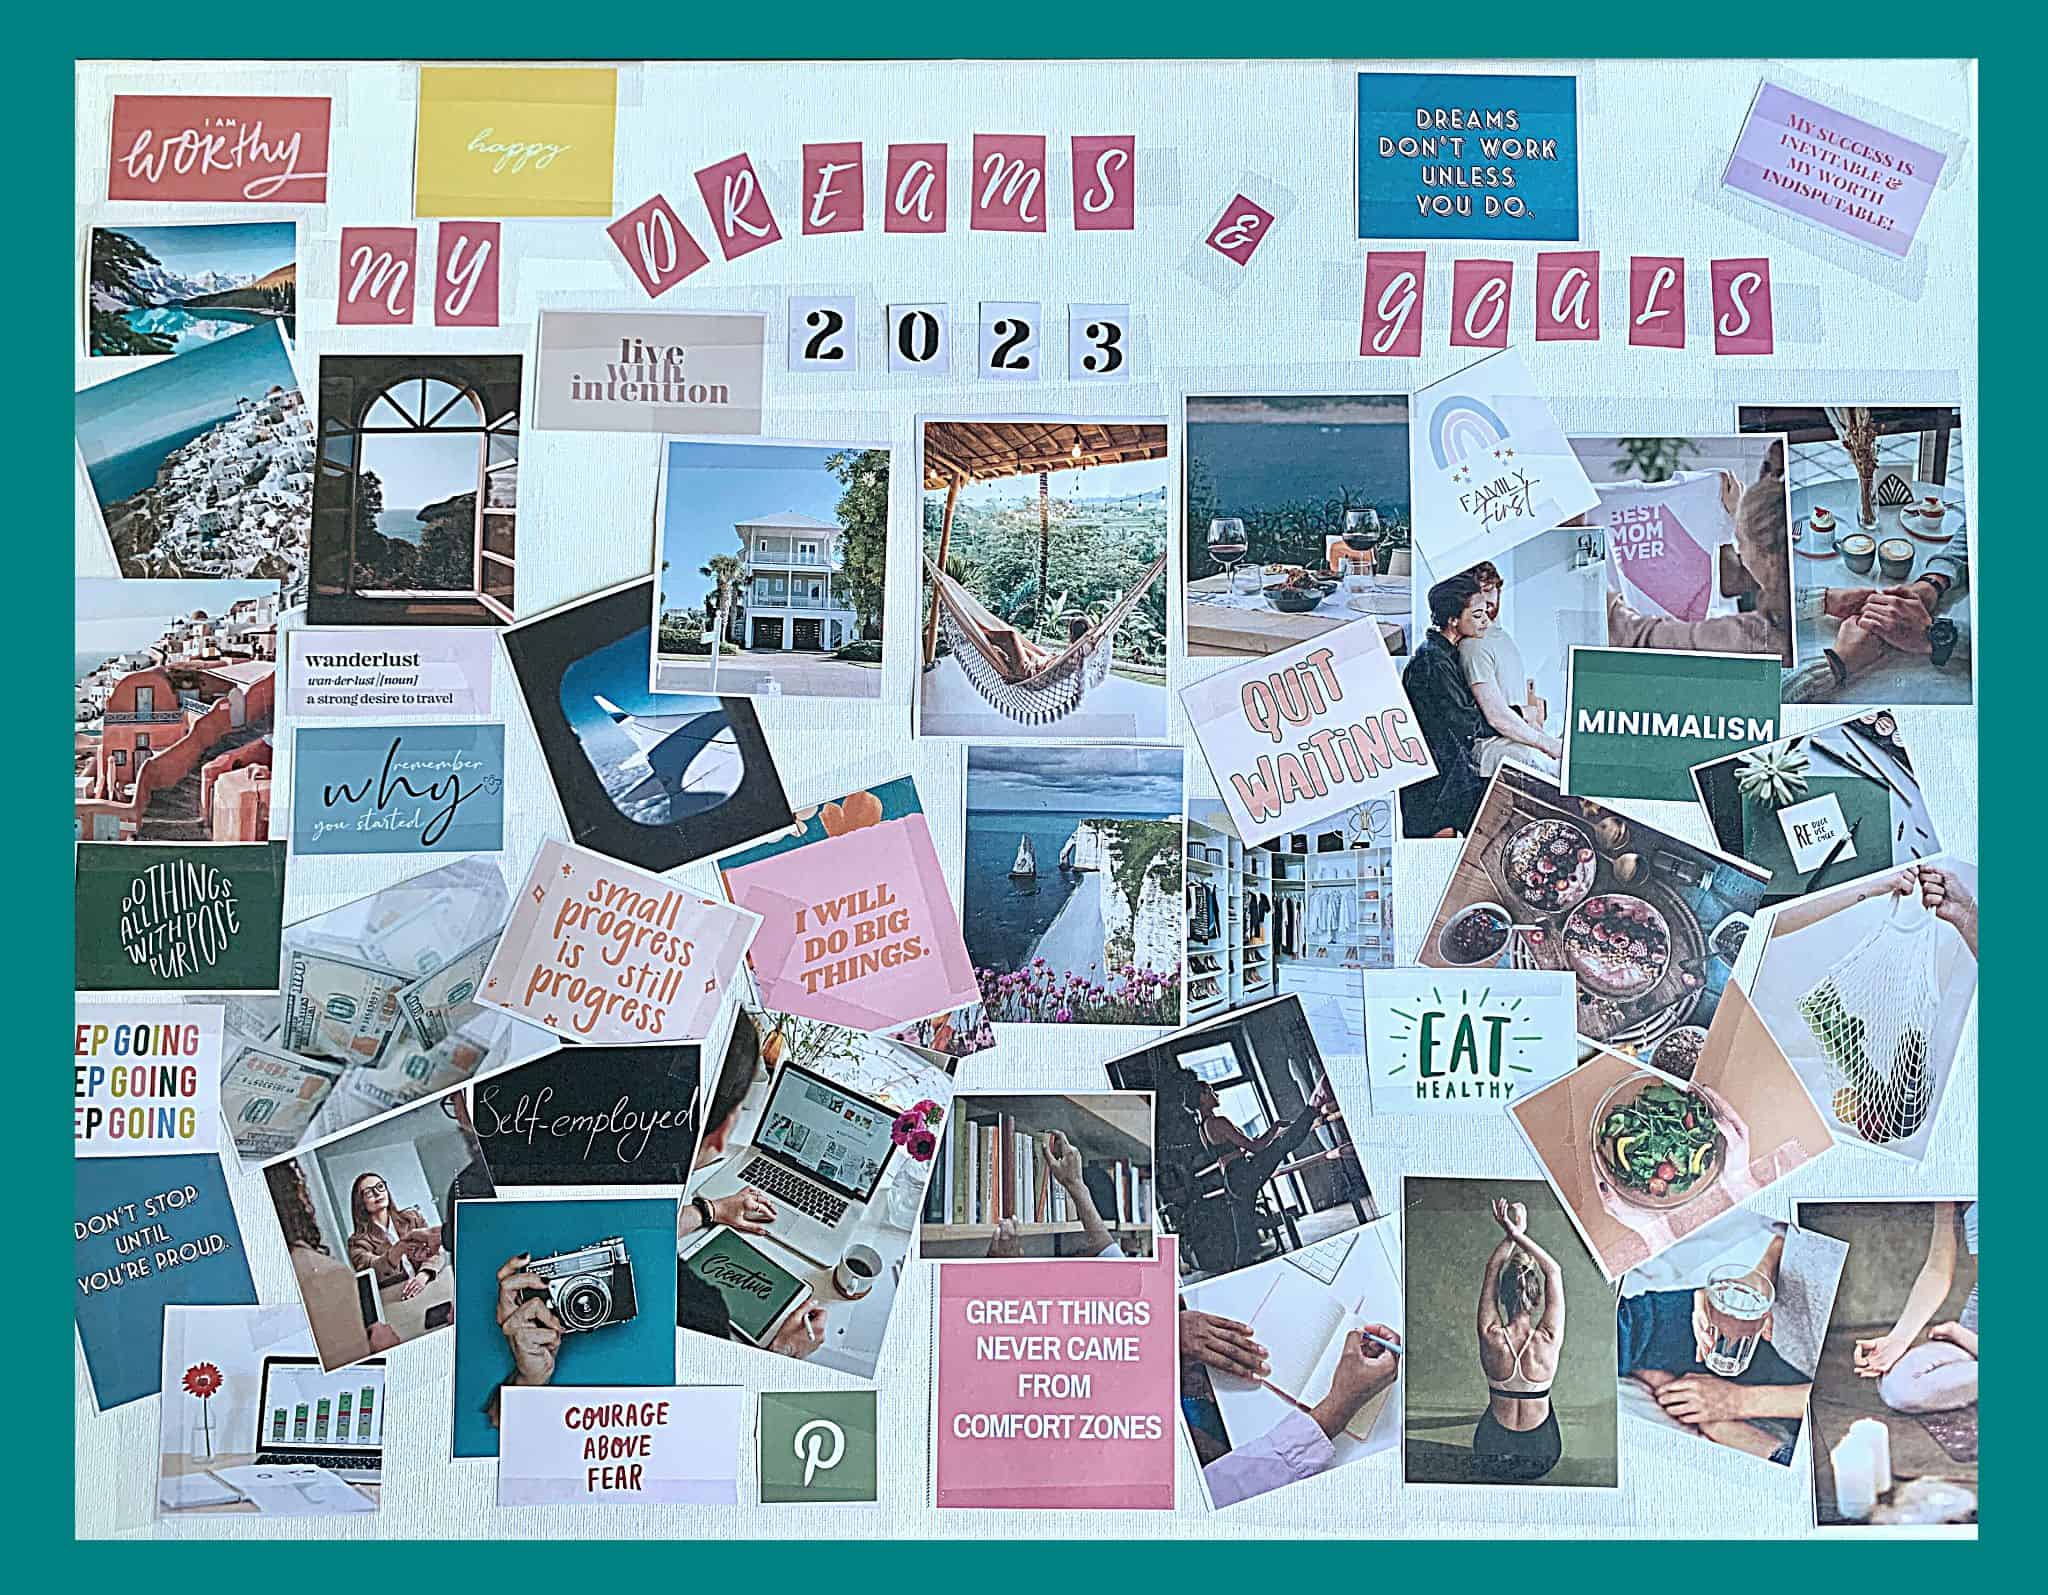 How to make a vision board that works in 2023  Making a vision board,  Vision board, Vision board themes